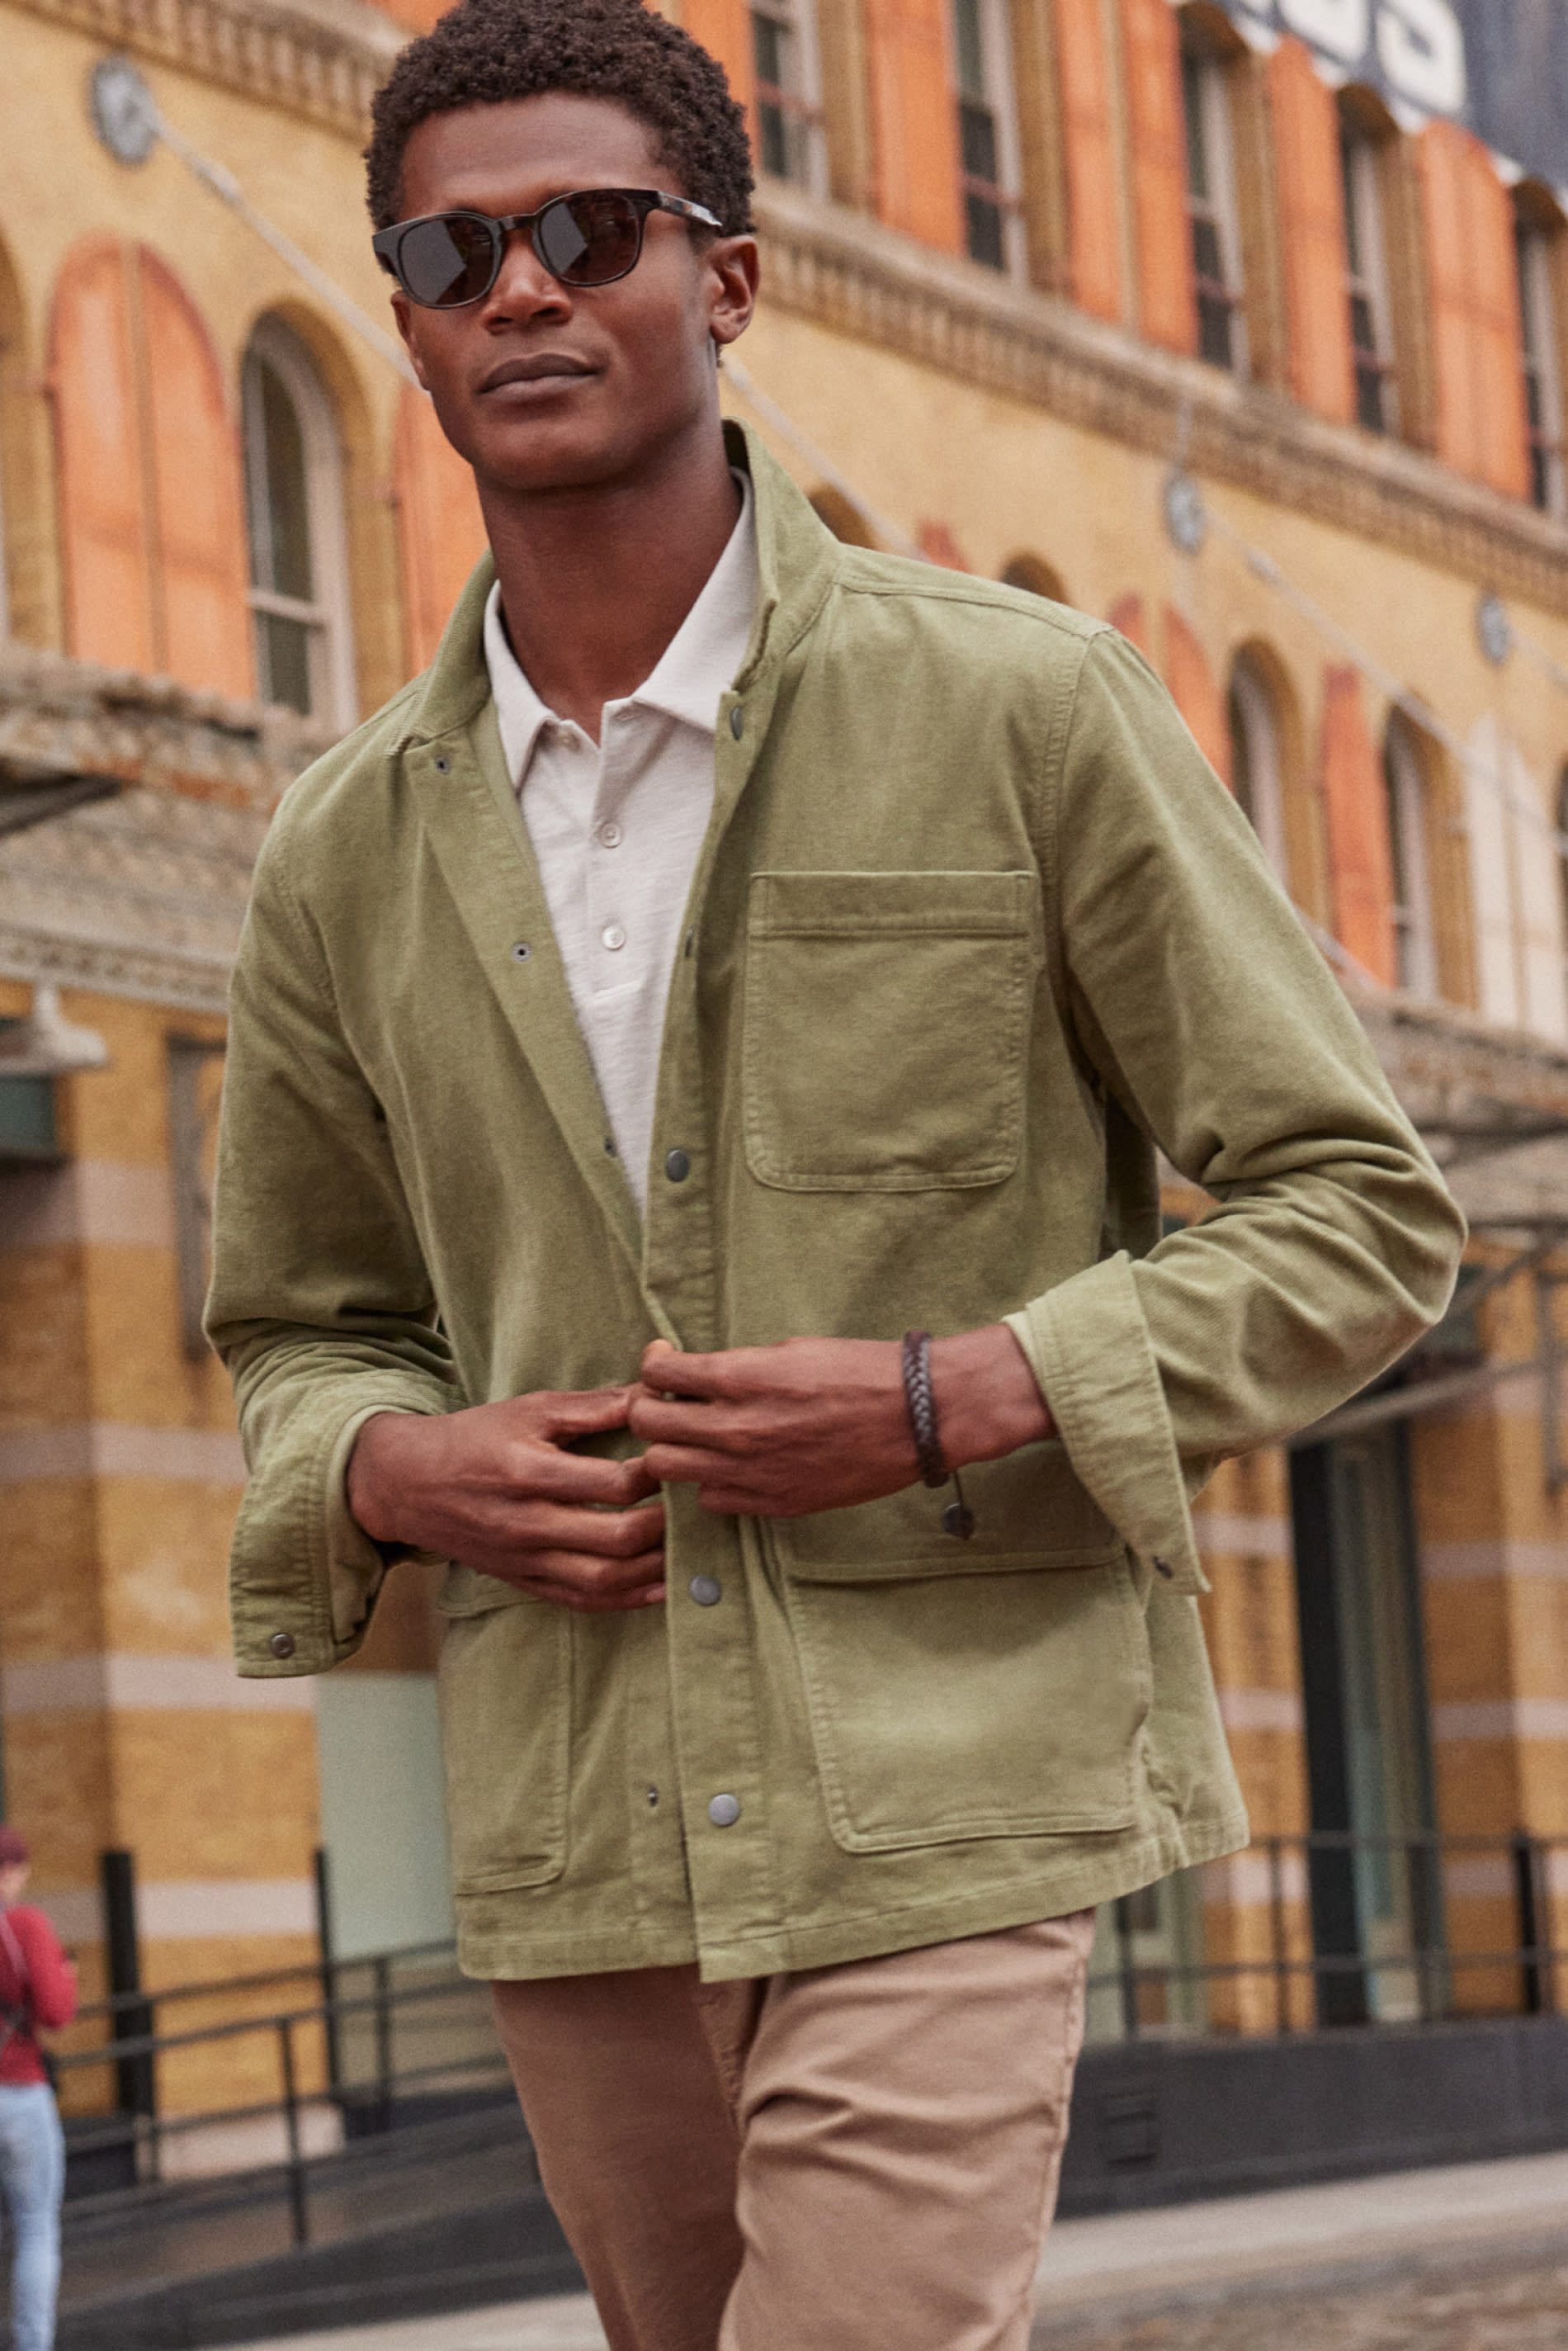 Model wearing Stitch Fix men’s clothing including trending utility jacket and pants.